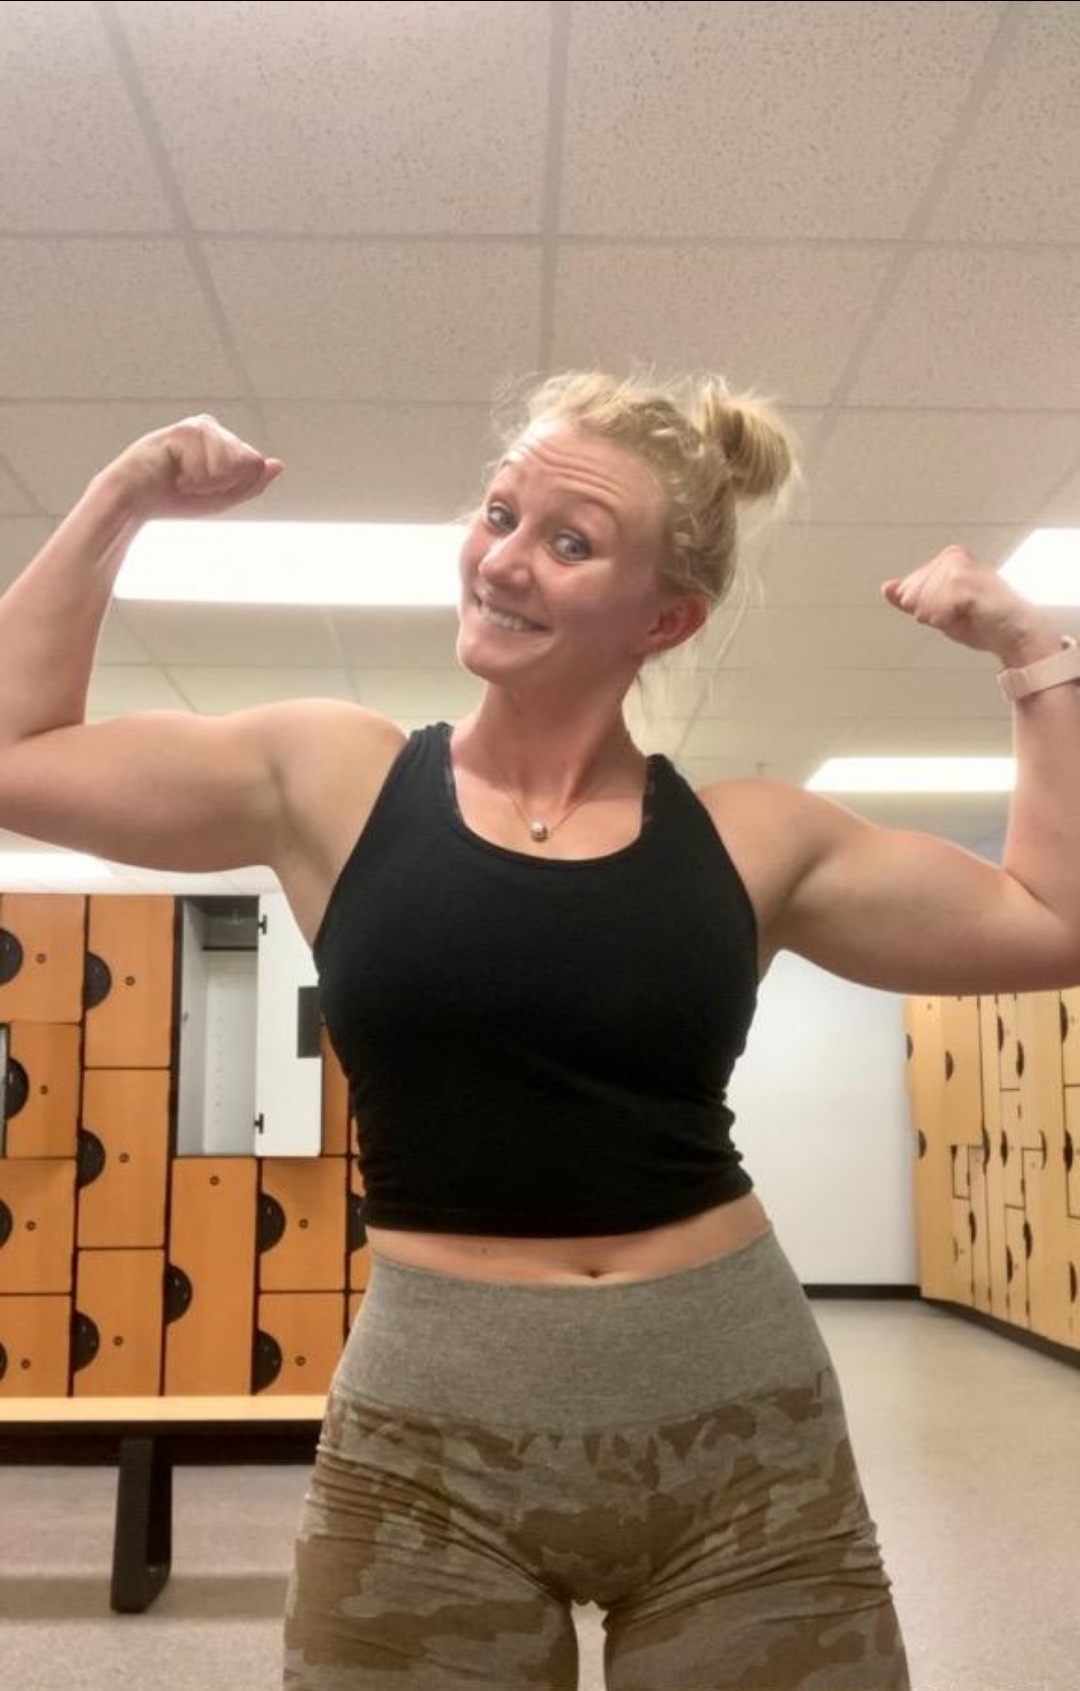 Smiling Female Athlete Flexing Muscle, Empowered and Strong